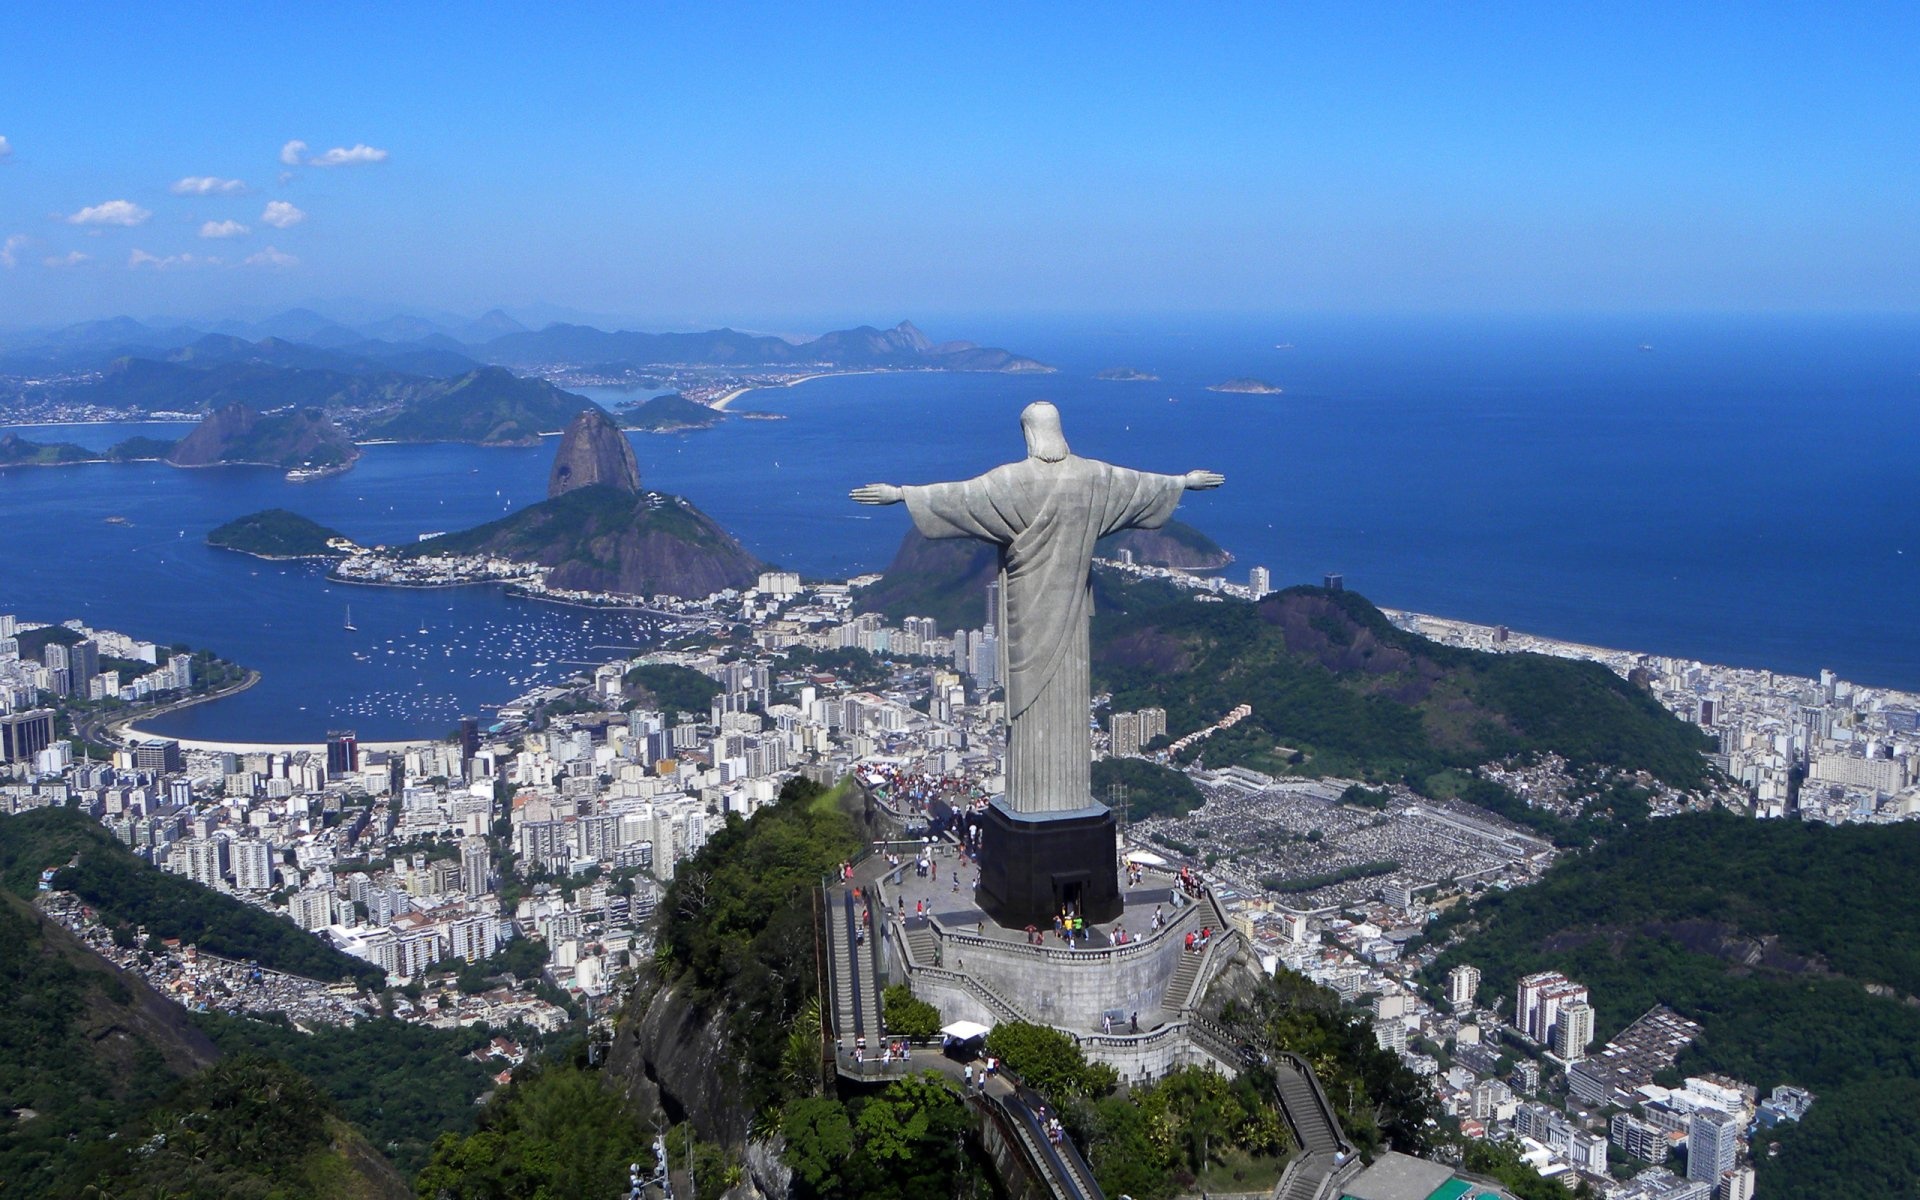 Corcovado Mountain, HD wallpapers, Background images, Scenic views, 1920x1200 HD Desktop